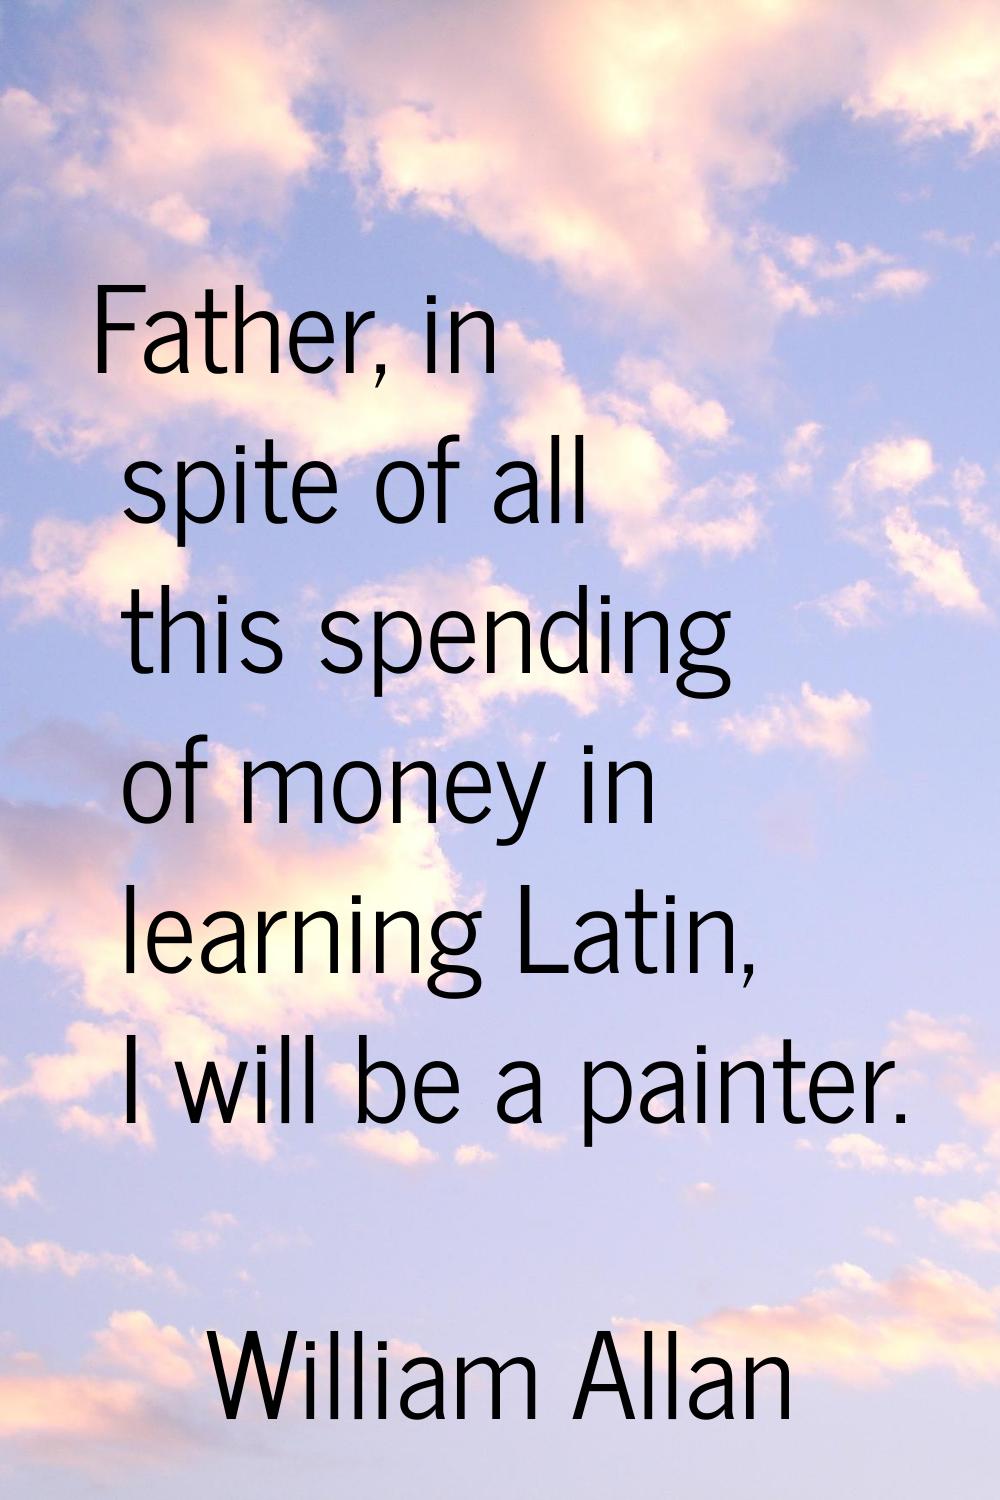 Father, in spite of all this spending of money in learning Latin, I will be a painter.